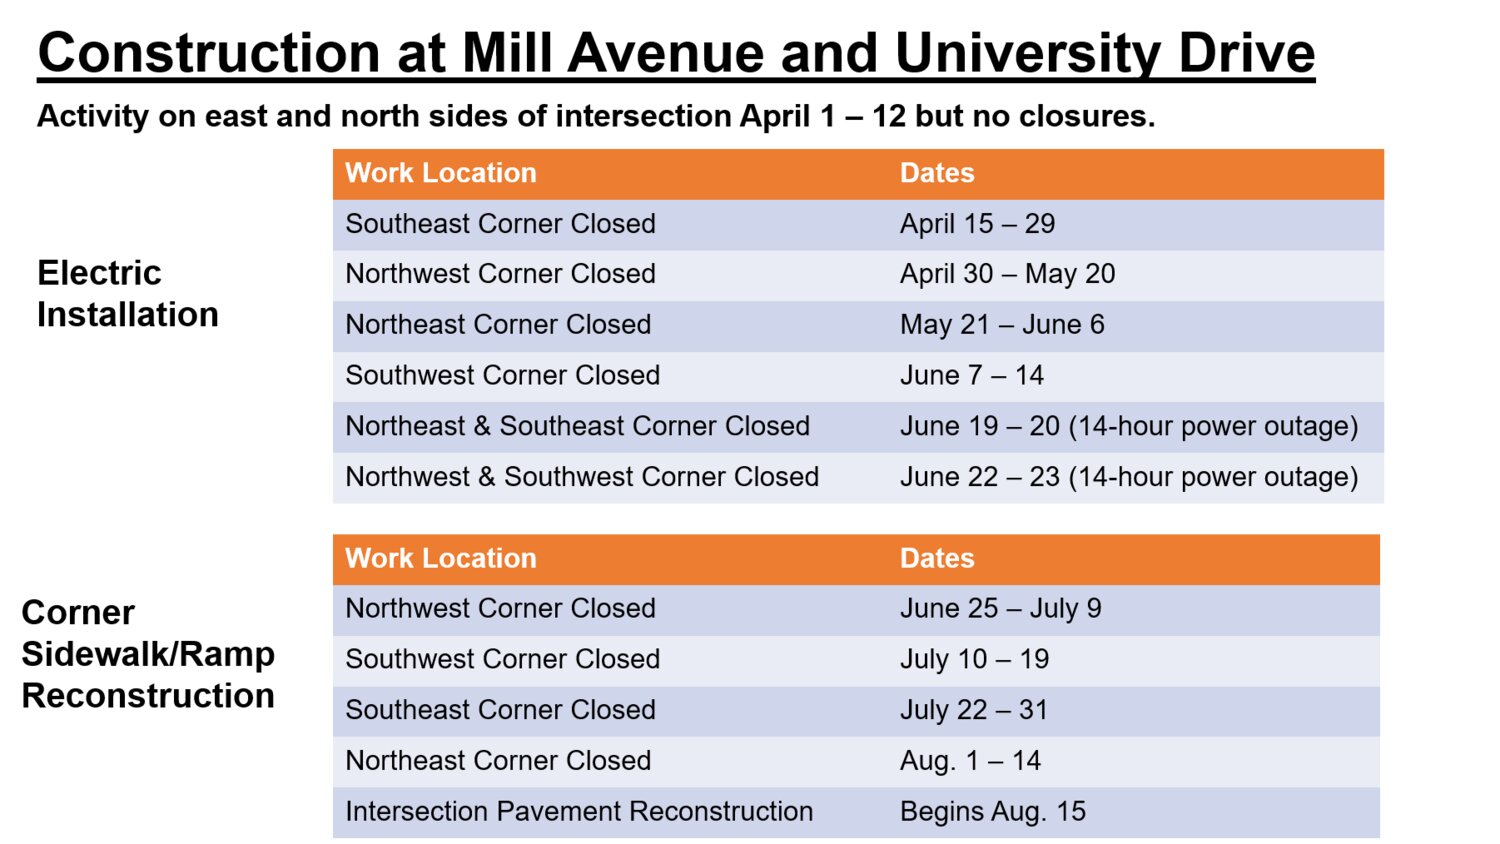 Scheduled closures related to the Mill Avenue and University Drive construction.